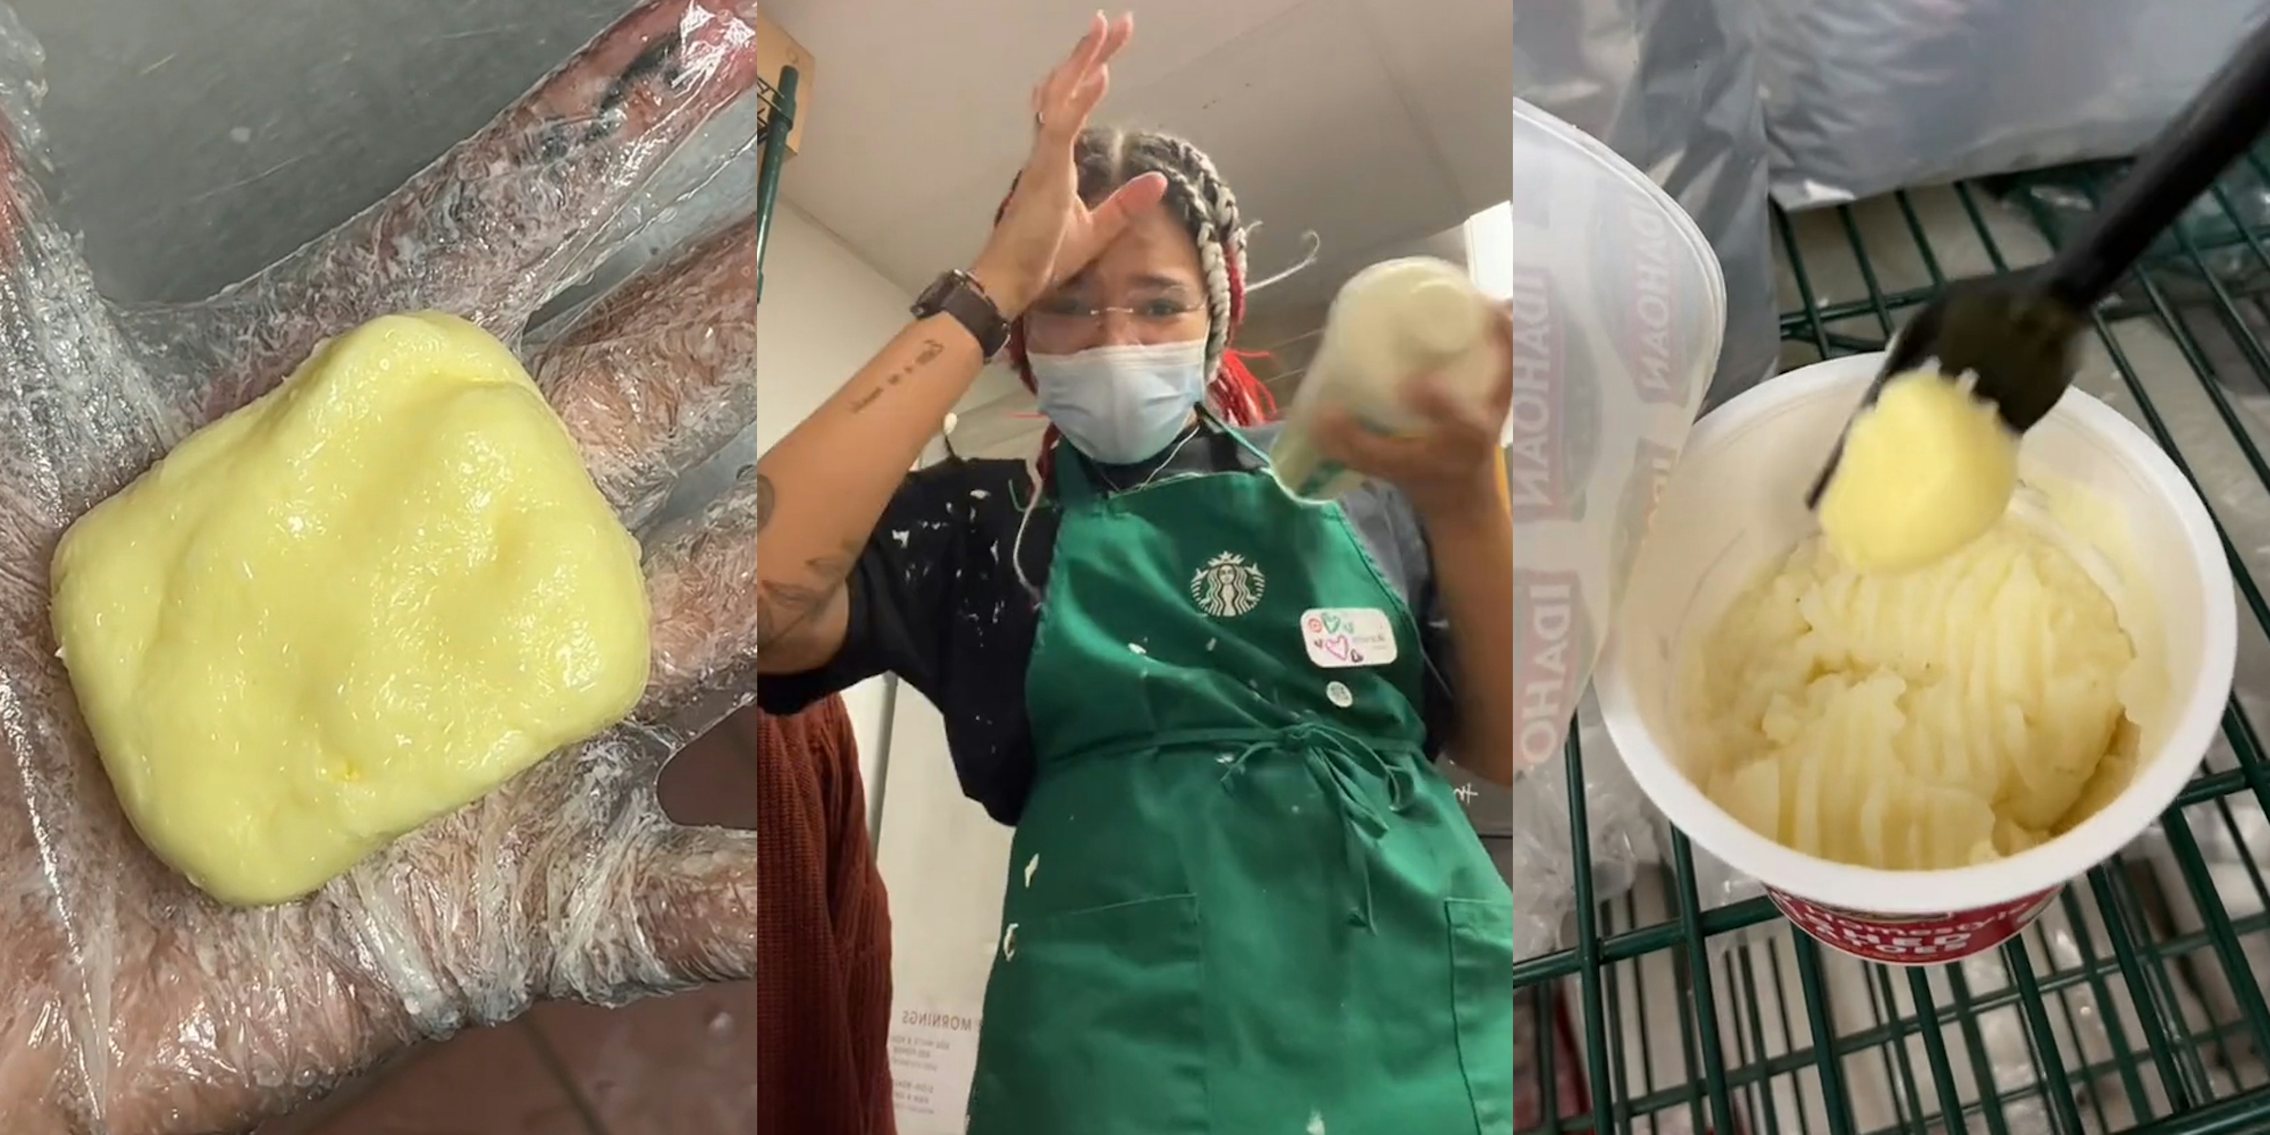 Starbucks worker with gloved hand holding butter (l) Starbucks worker making butter with butter spilled all over her apron (l) fork with butter over potatoes in container (r)